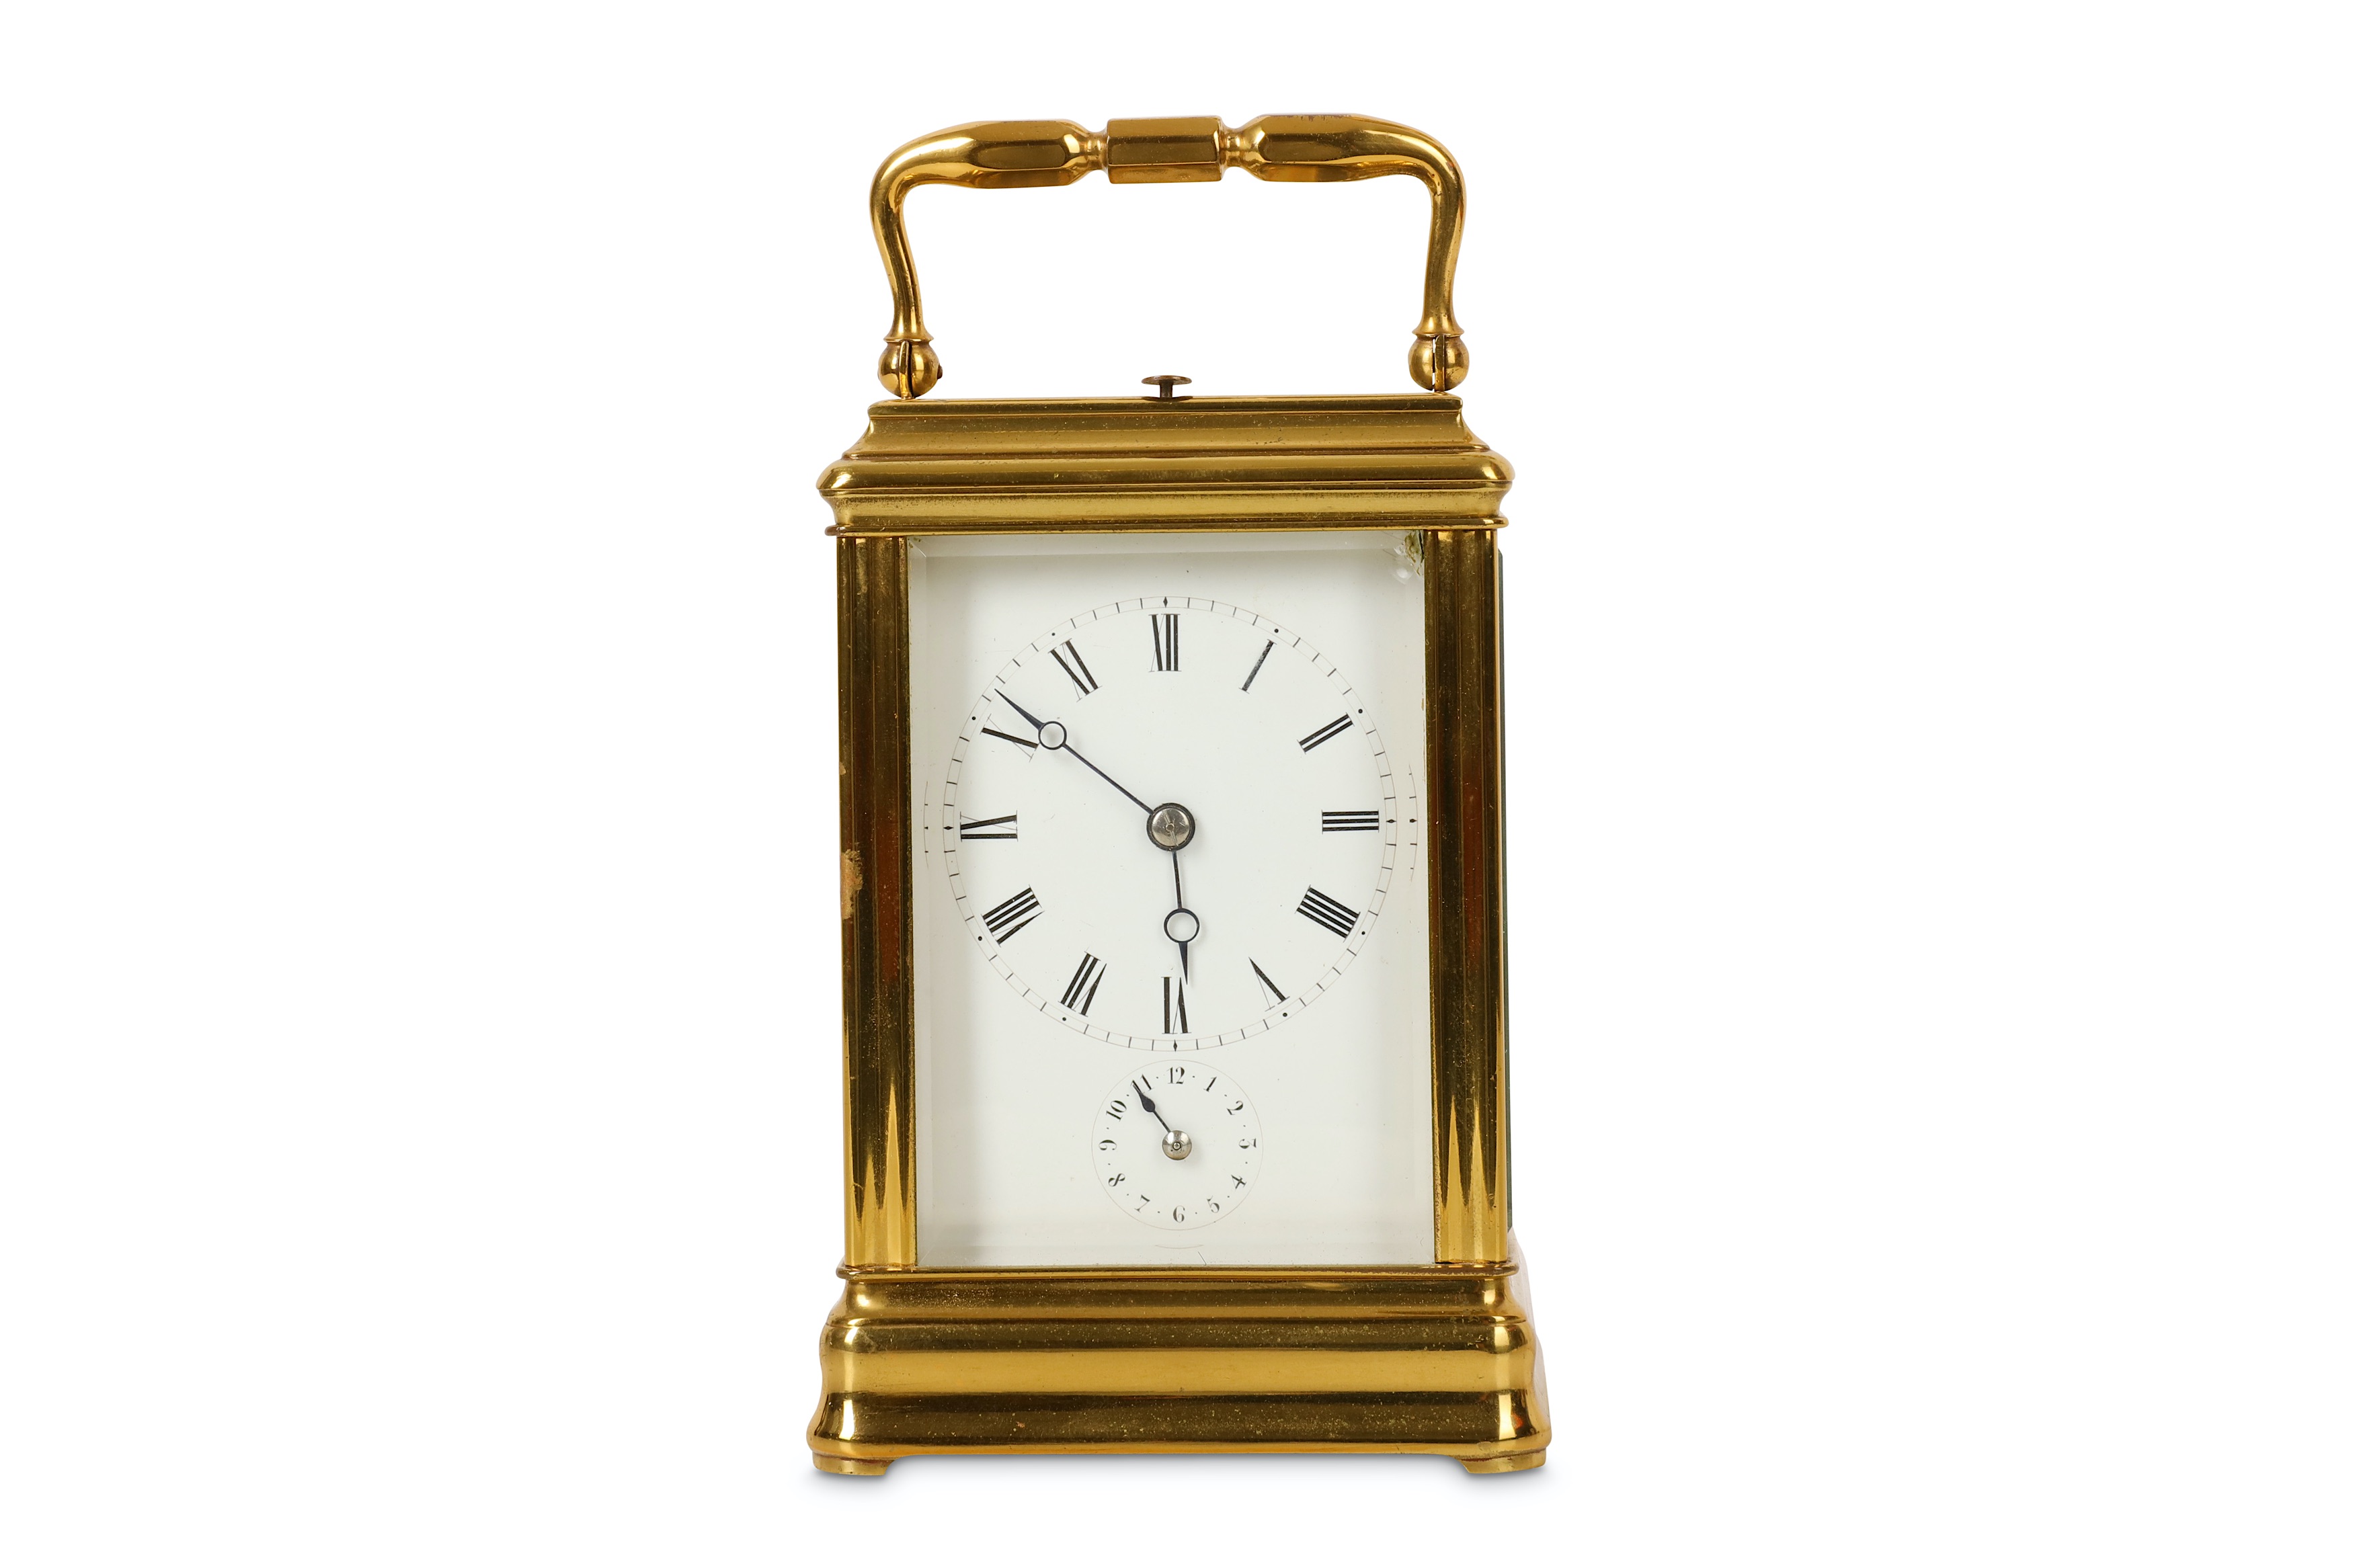 A LATE 19TH CENTURY FRENCH LACQUERED BRASS CARRIAGE CLOCK WITH ALARM AND REPEAT  the gorge case with